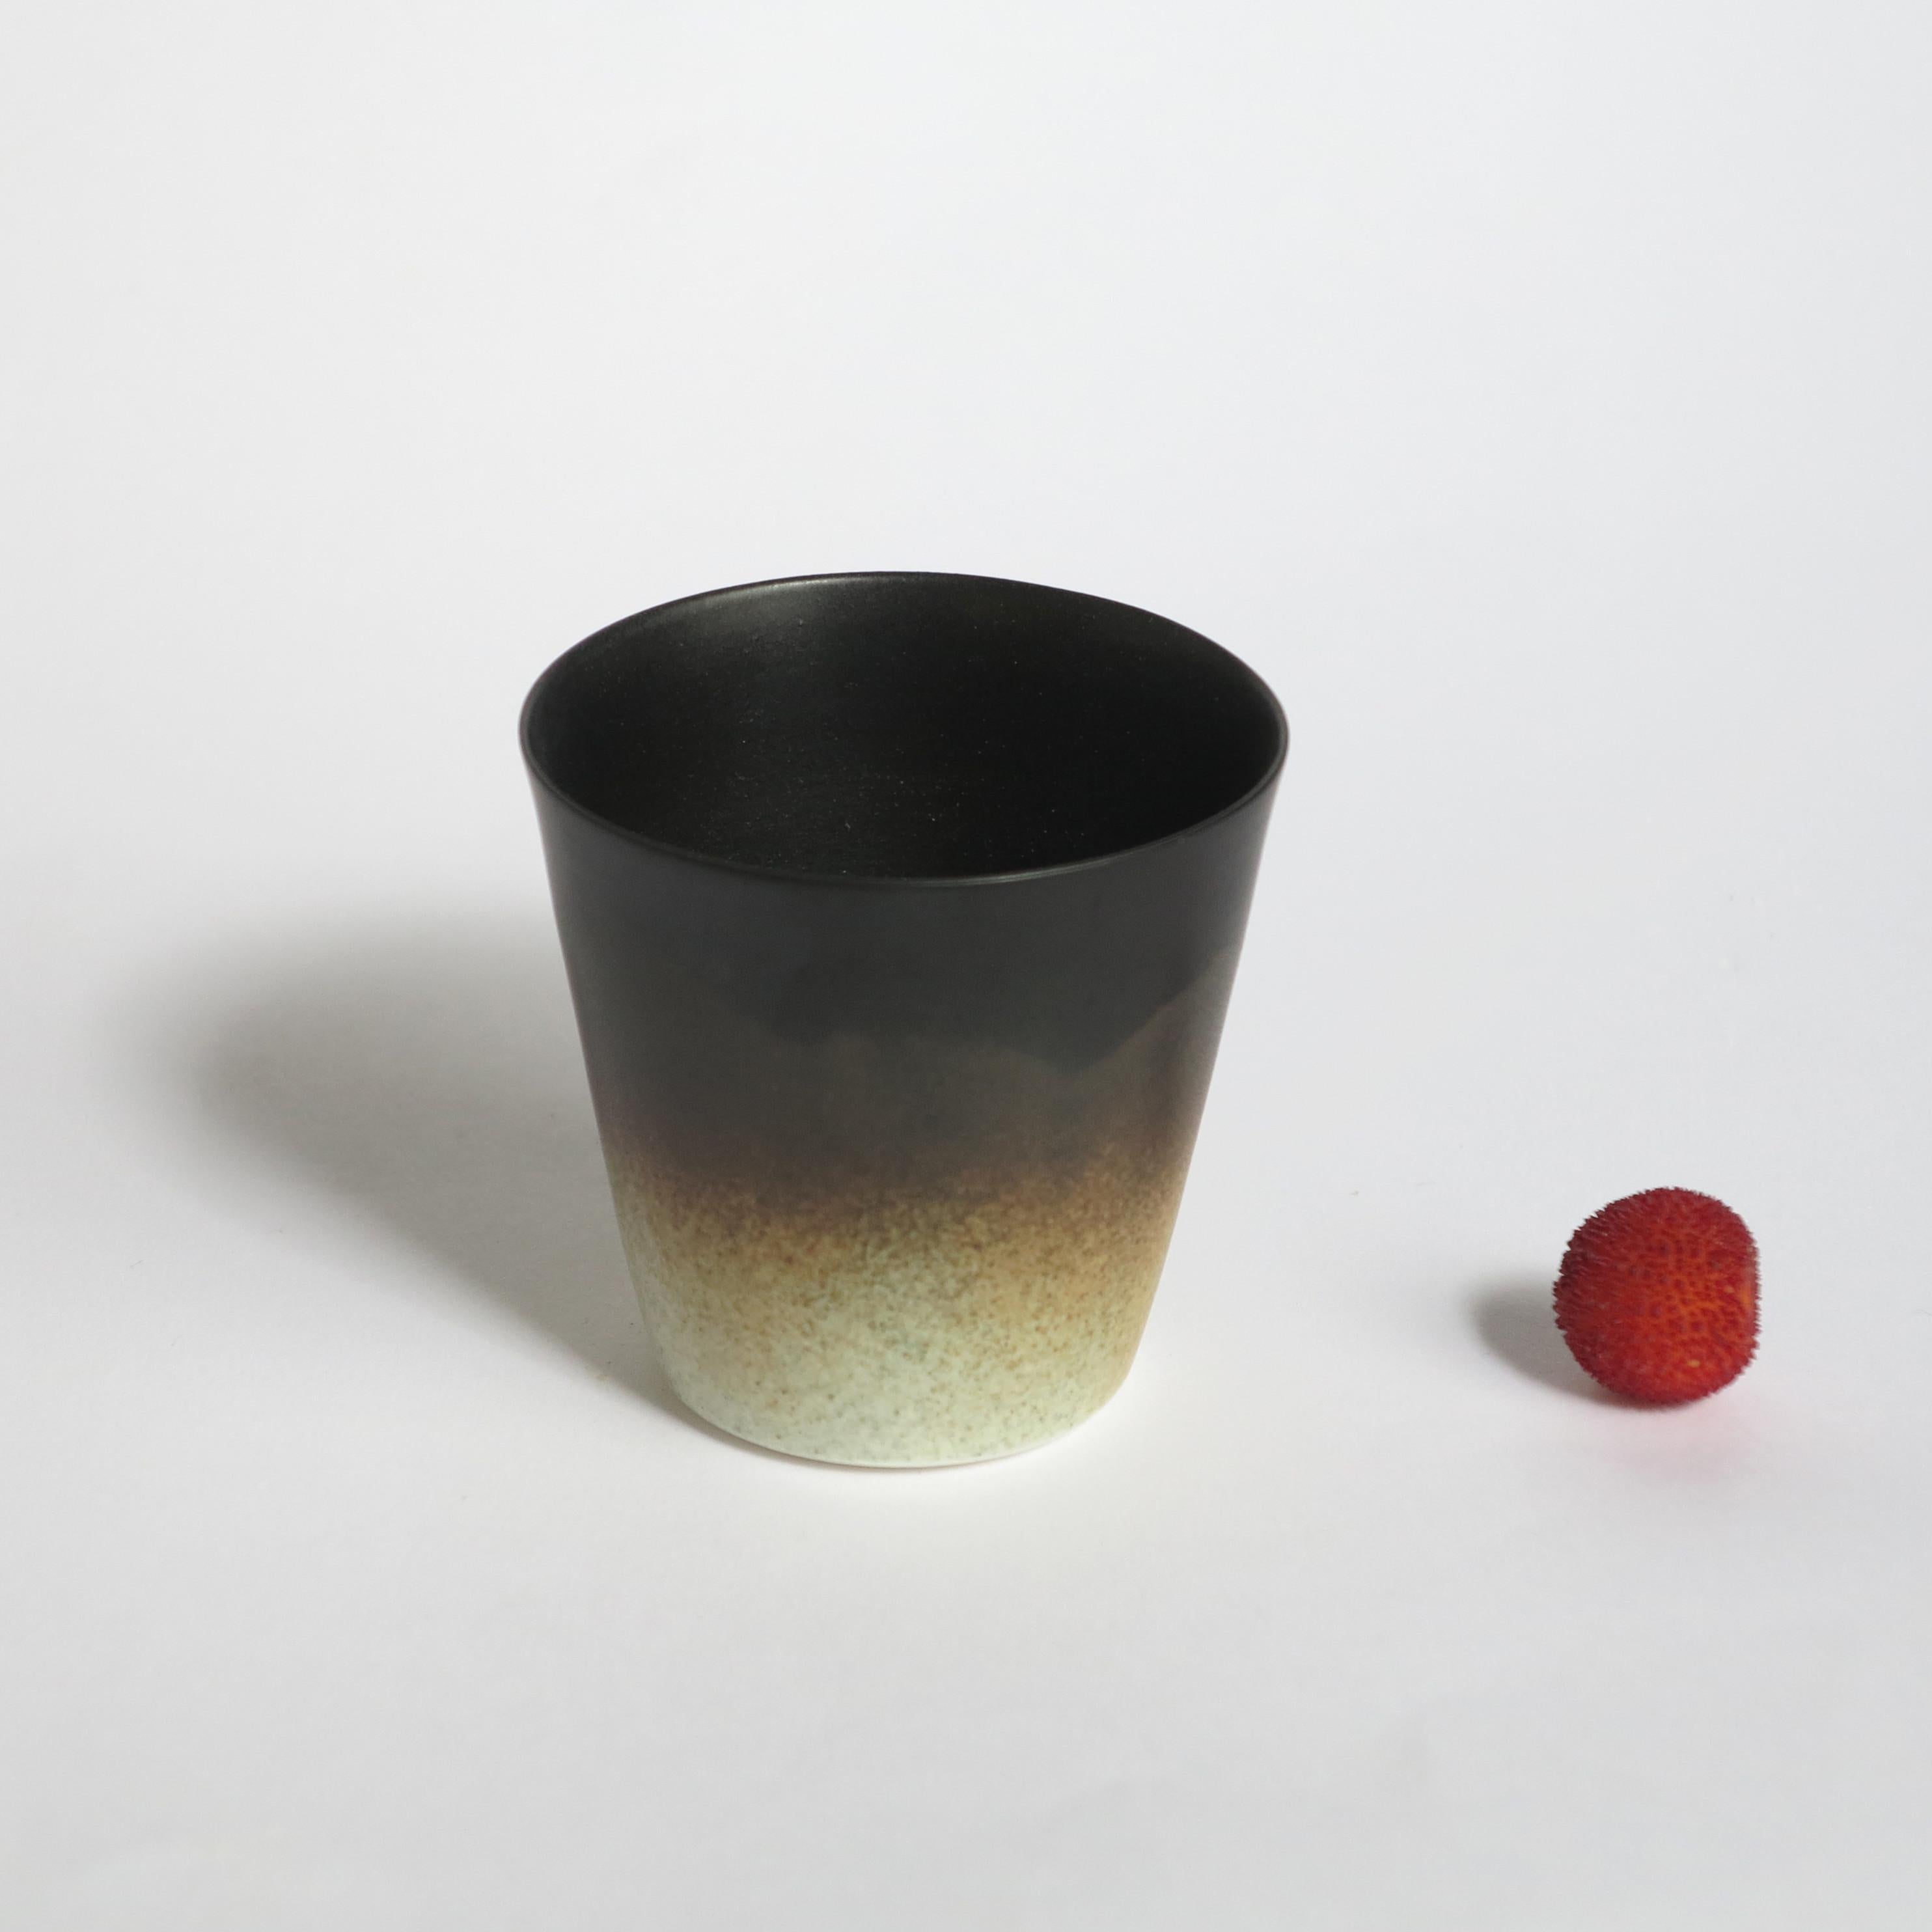 Set of 4 Porcelain coffee cups by Cica Gomez
Price for set of 4.
Dimensions: Ø 6.5 x H 6 cm
Materials: Porcelain

Usual objects. My work is first driven by the search for the line. The one that it draw when the object takes shape and place in